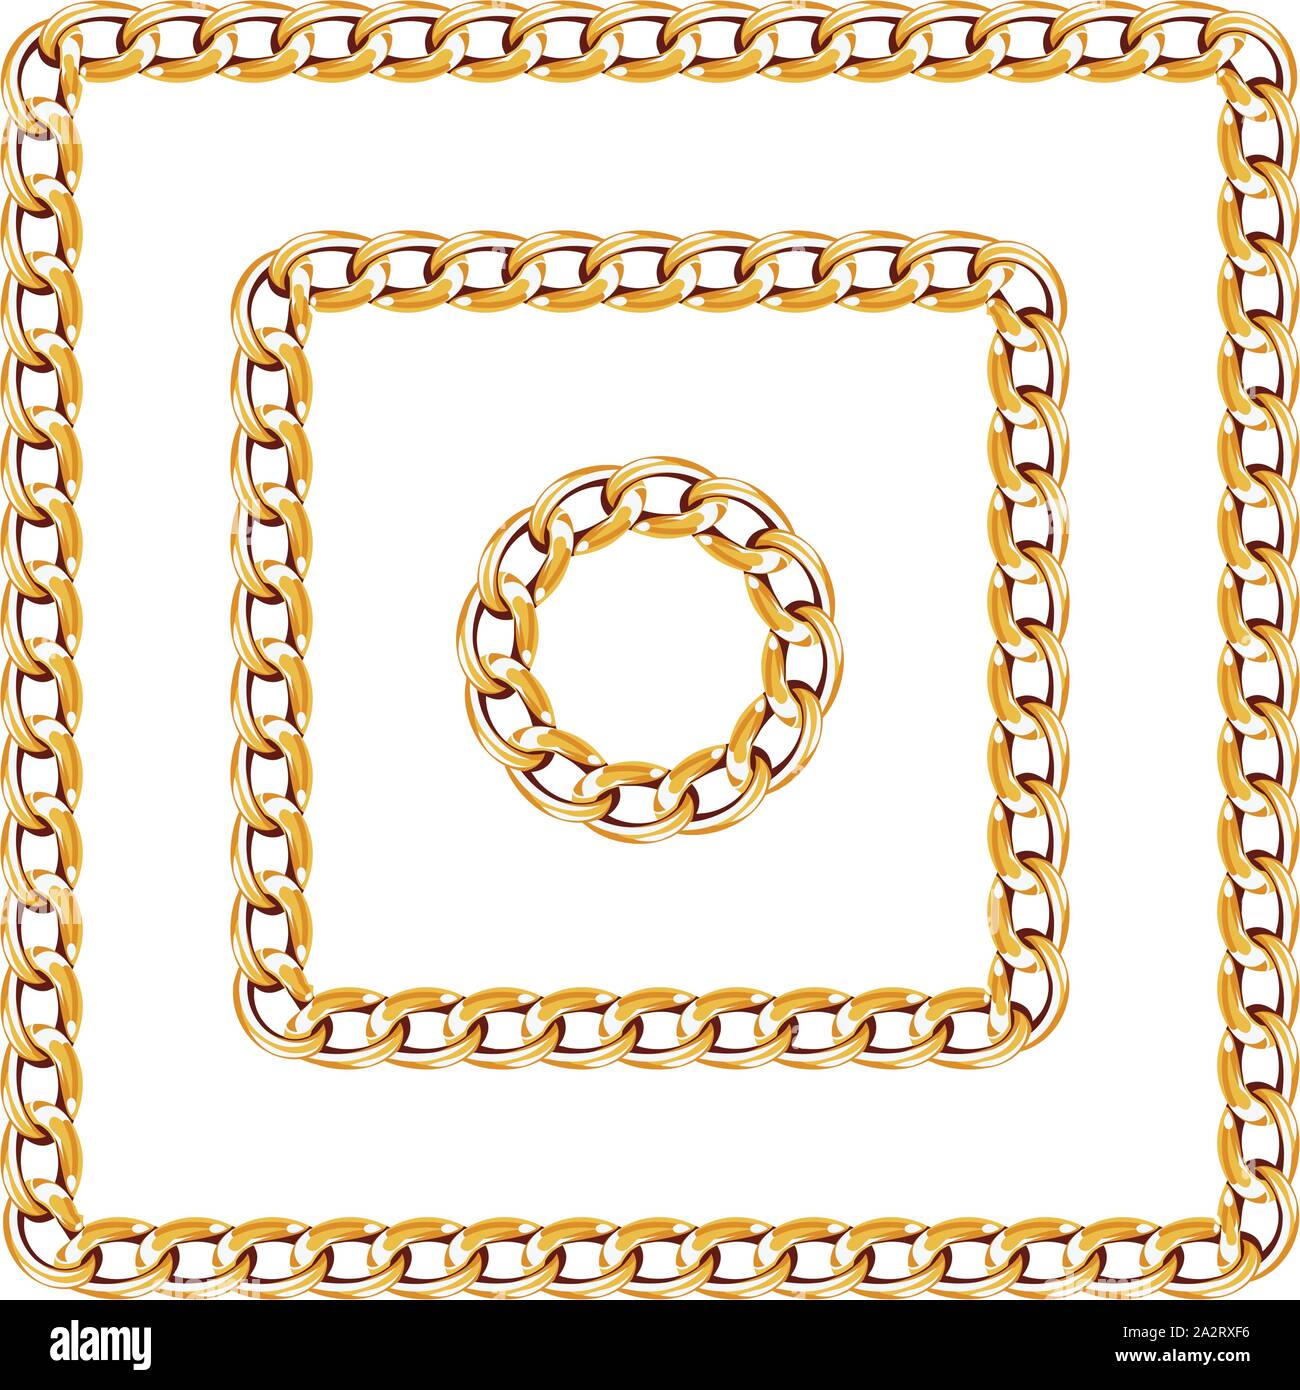 Precious Chains with a White Background. Luxury Square Chains Vector Illustration. Ready for Textile Print. Stock Vector